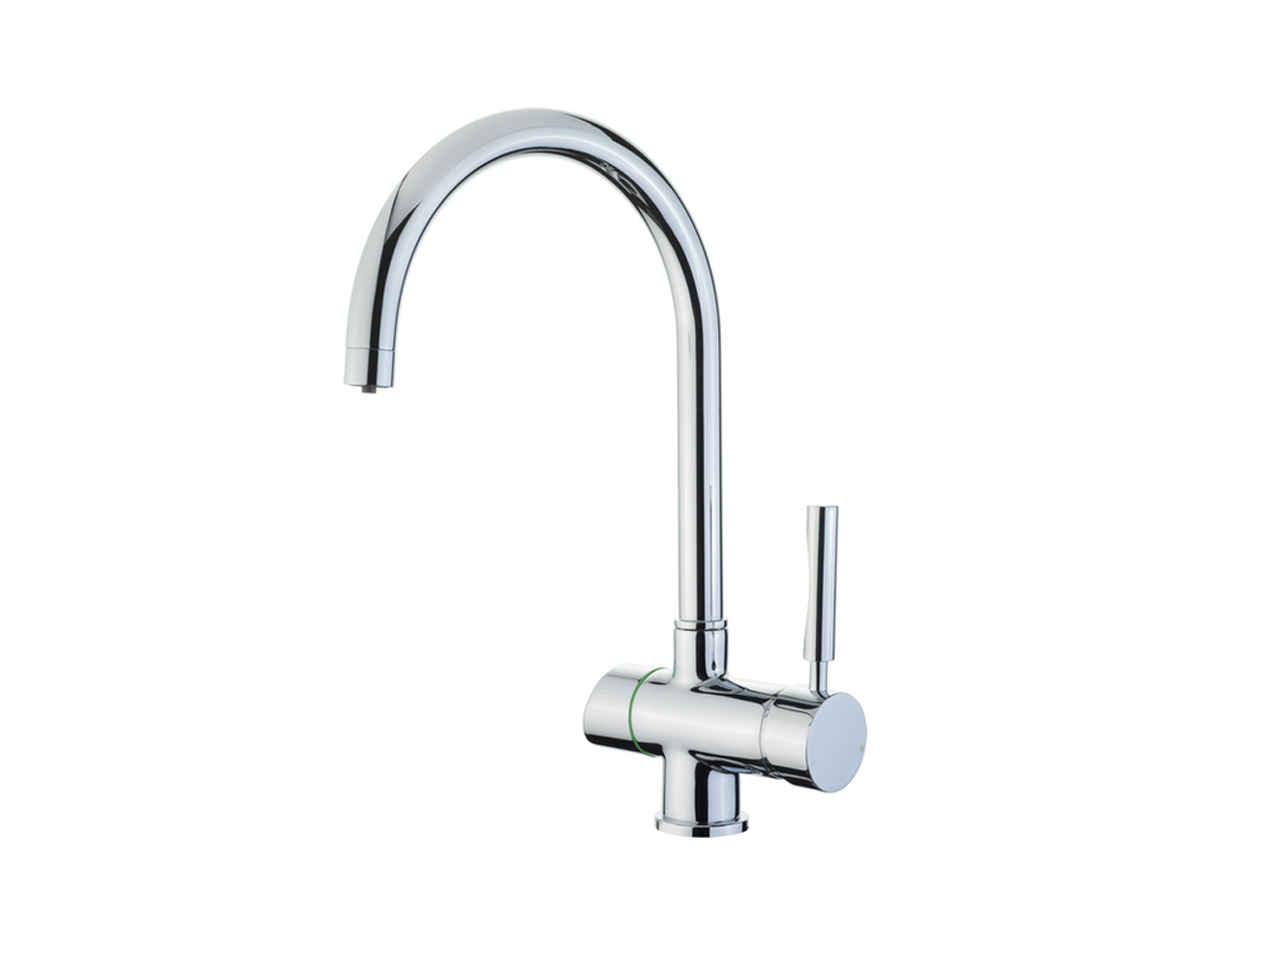 CisalSingle lever sink mixer for OSMOSIS KITCHEN_LC000010